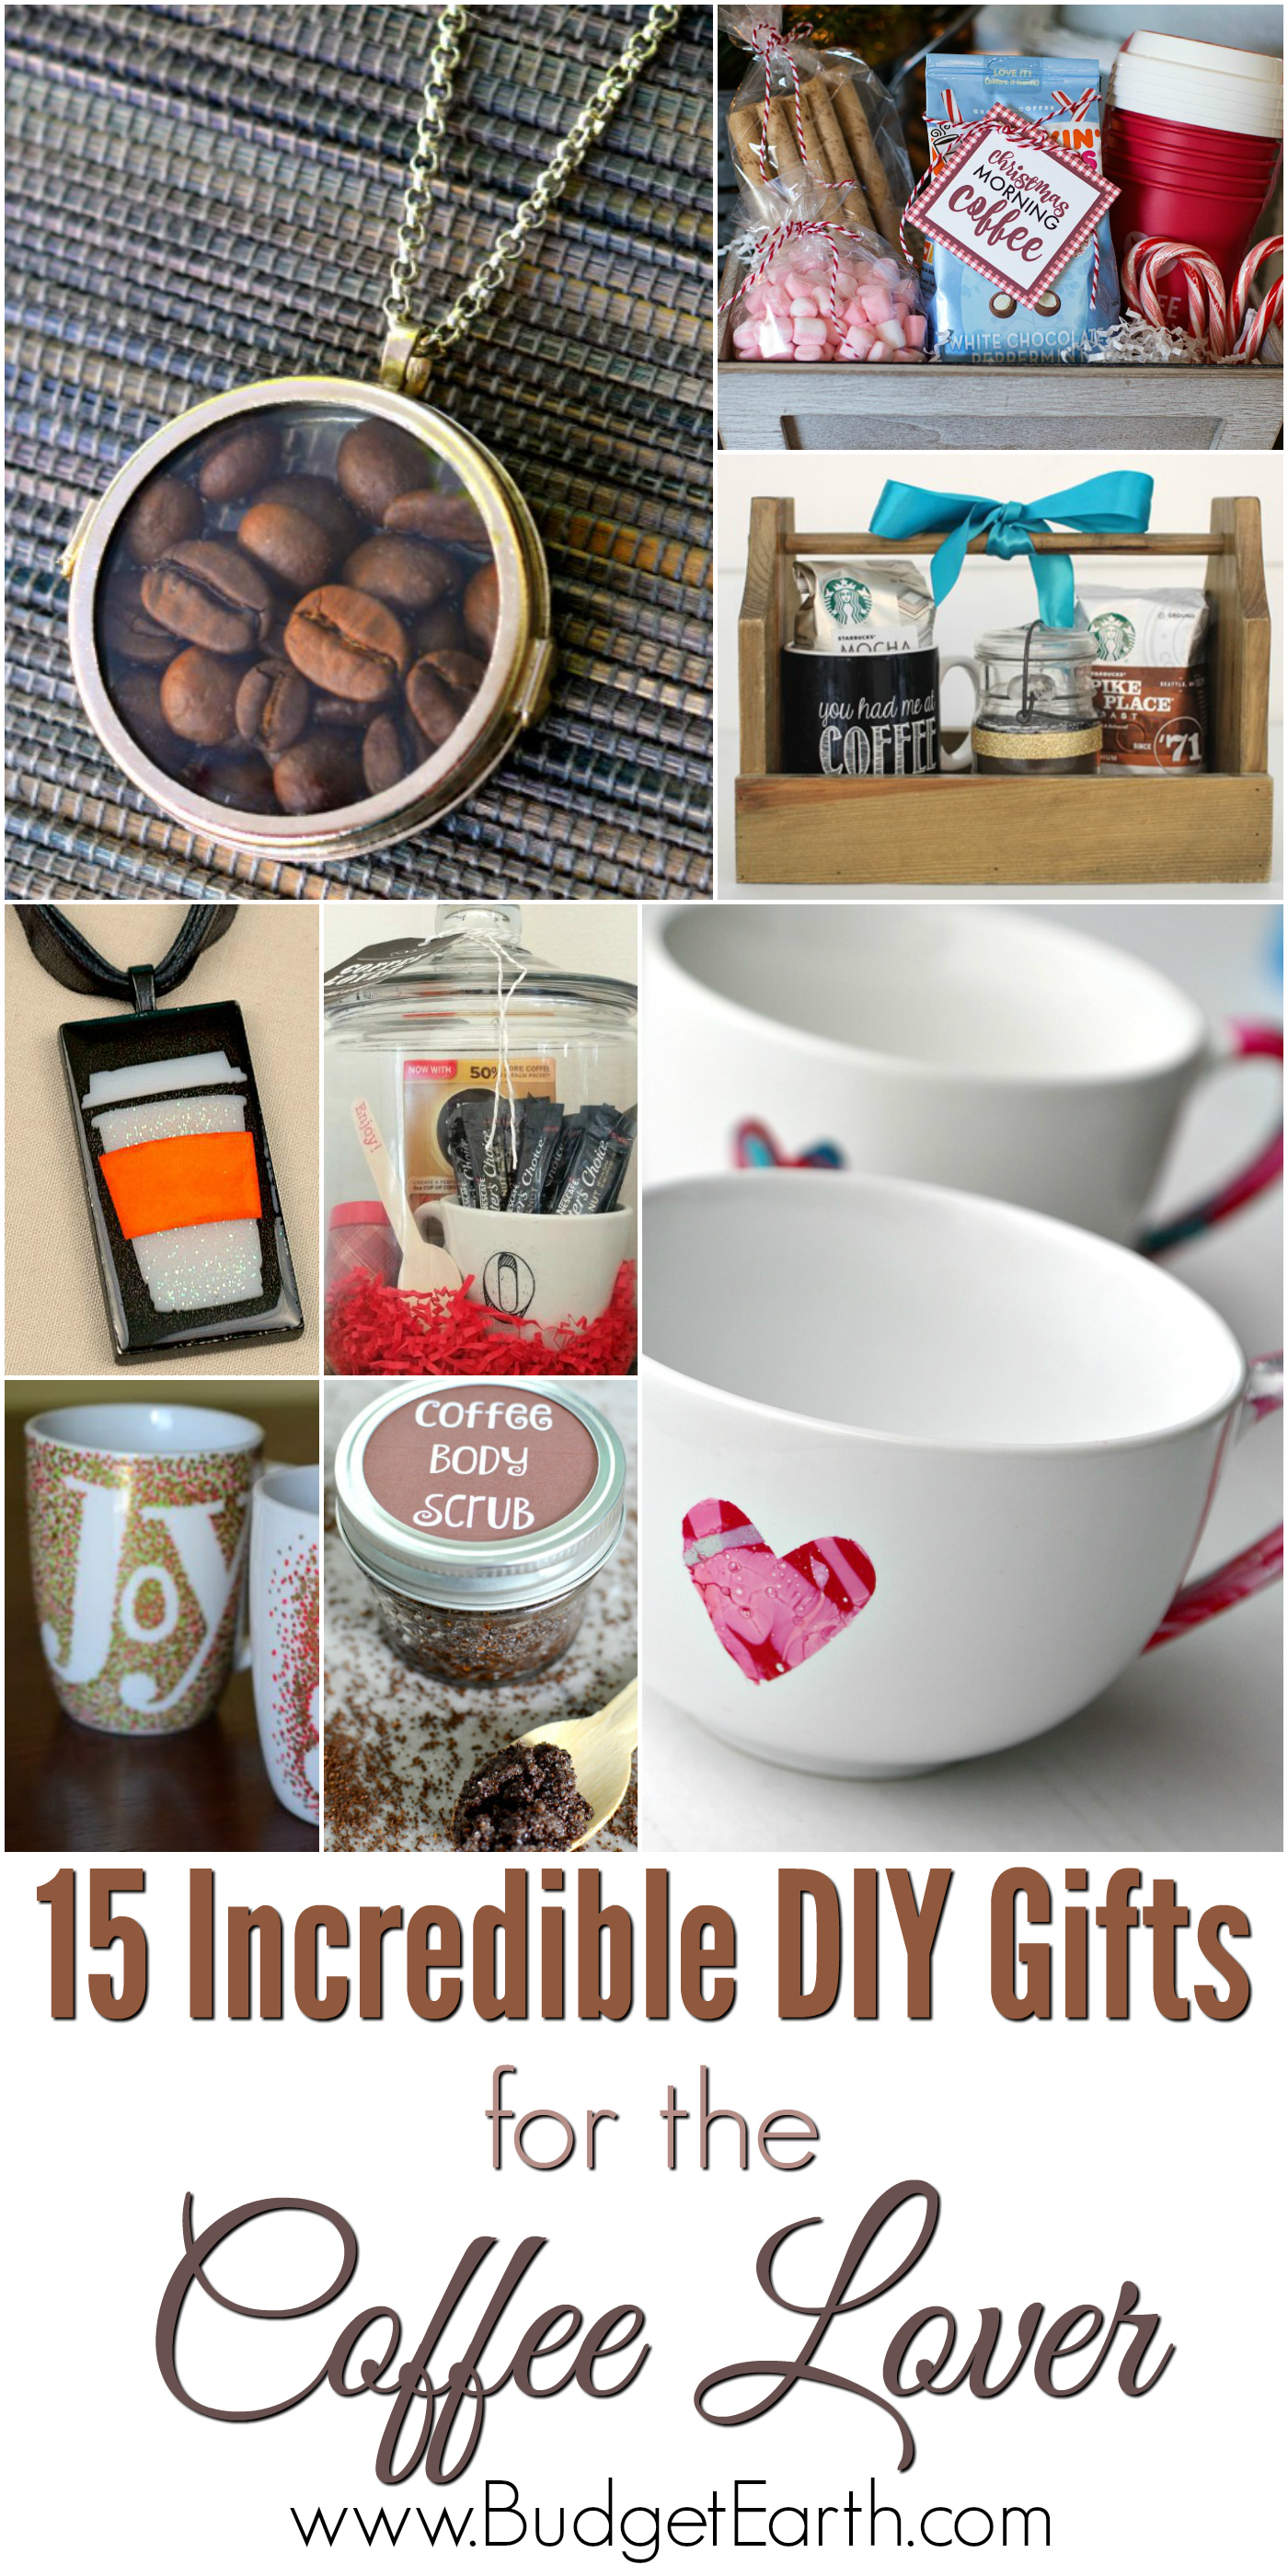 DIY Coffee Lovers Gift Idea - Inspiration Made Simple